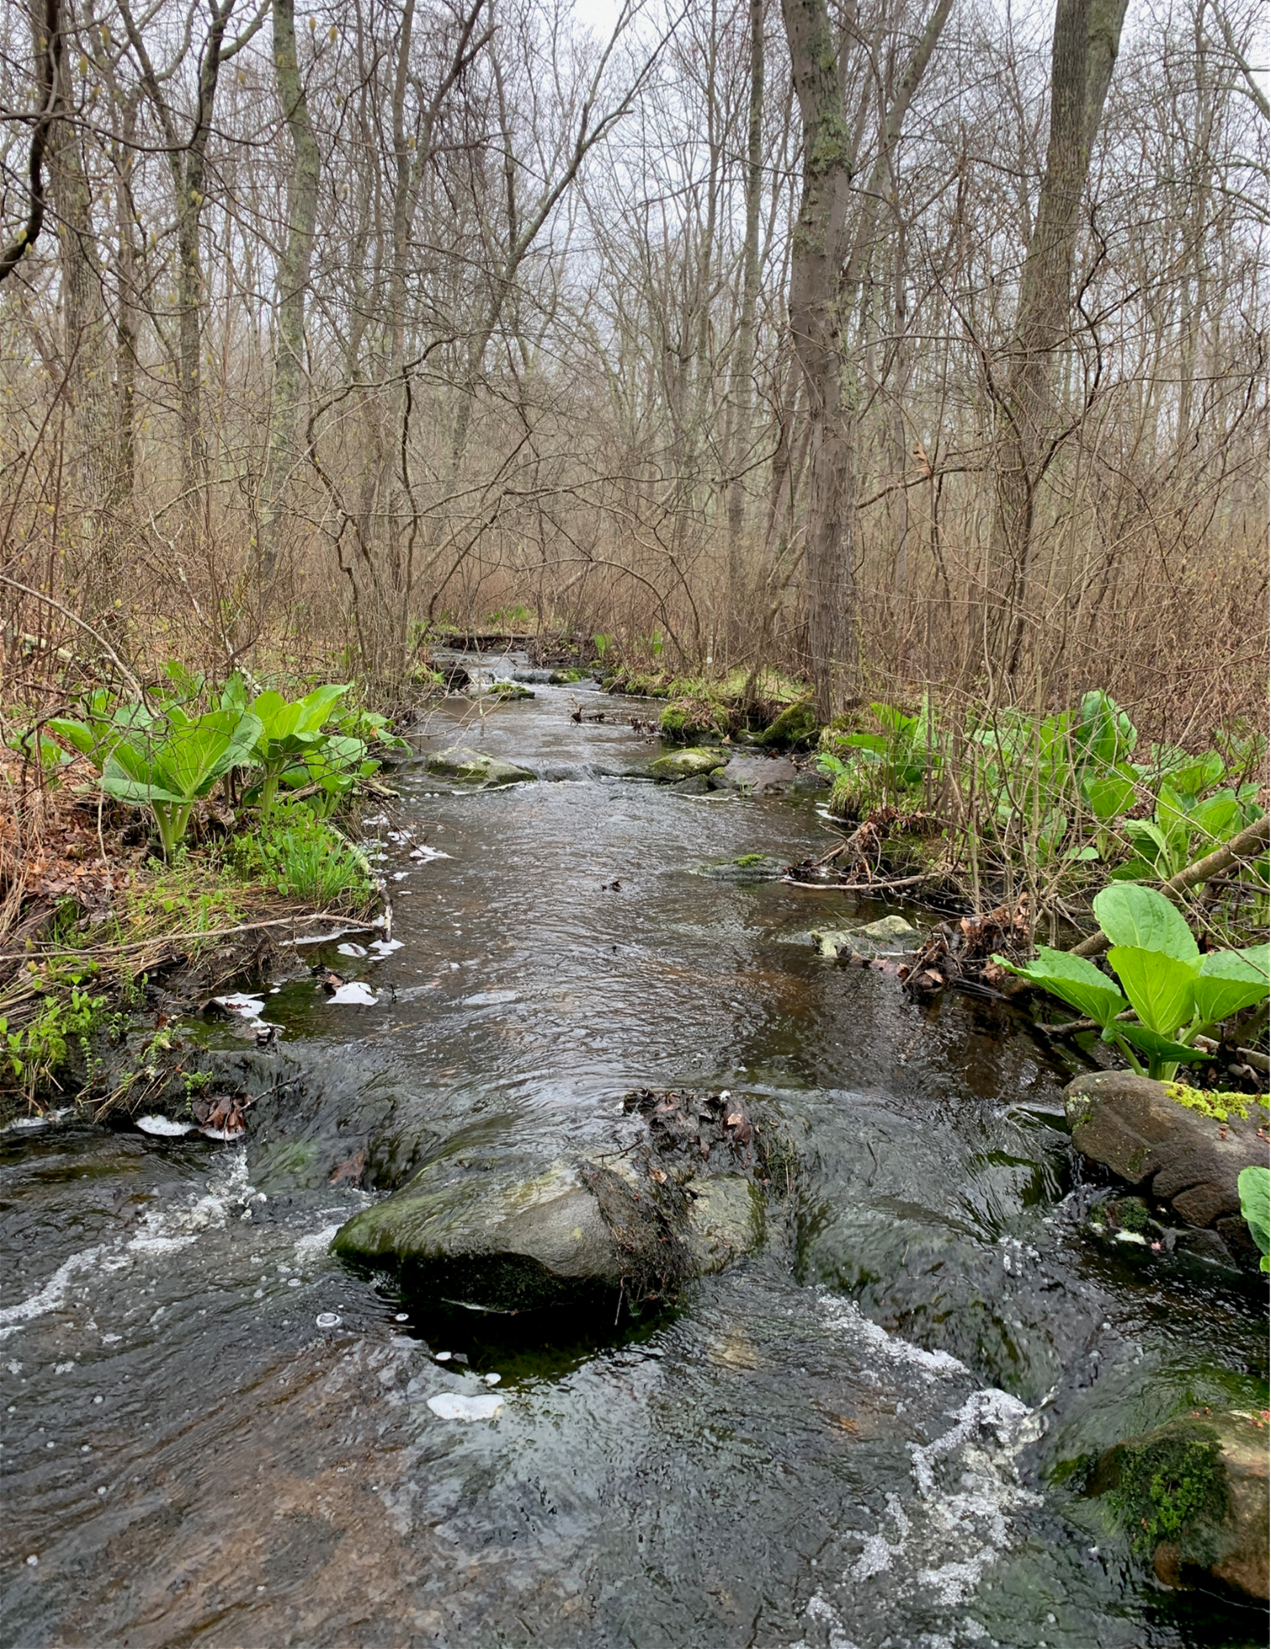 A small stream with skunk cabbage growing on its banks.